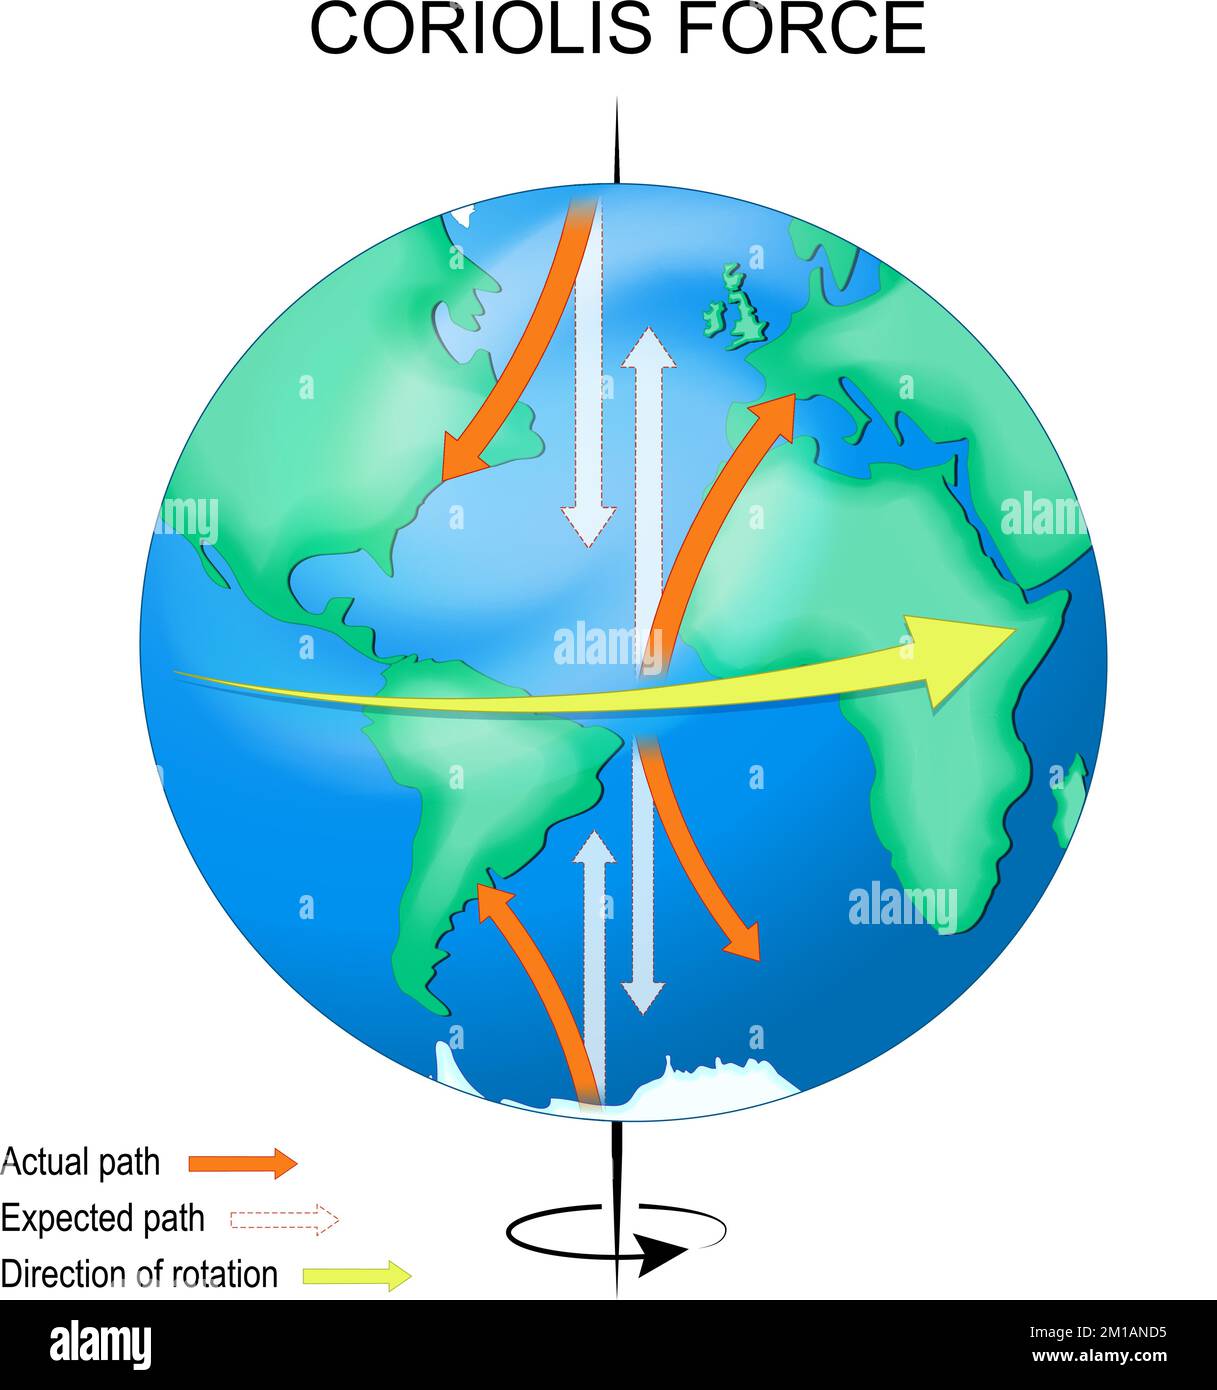 Coriolis effect. Earth with continents, equator, axis and arrows that show direction of rotation, Actual and Expected path. vector illustration Stock Vector